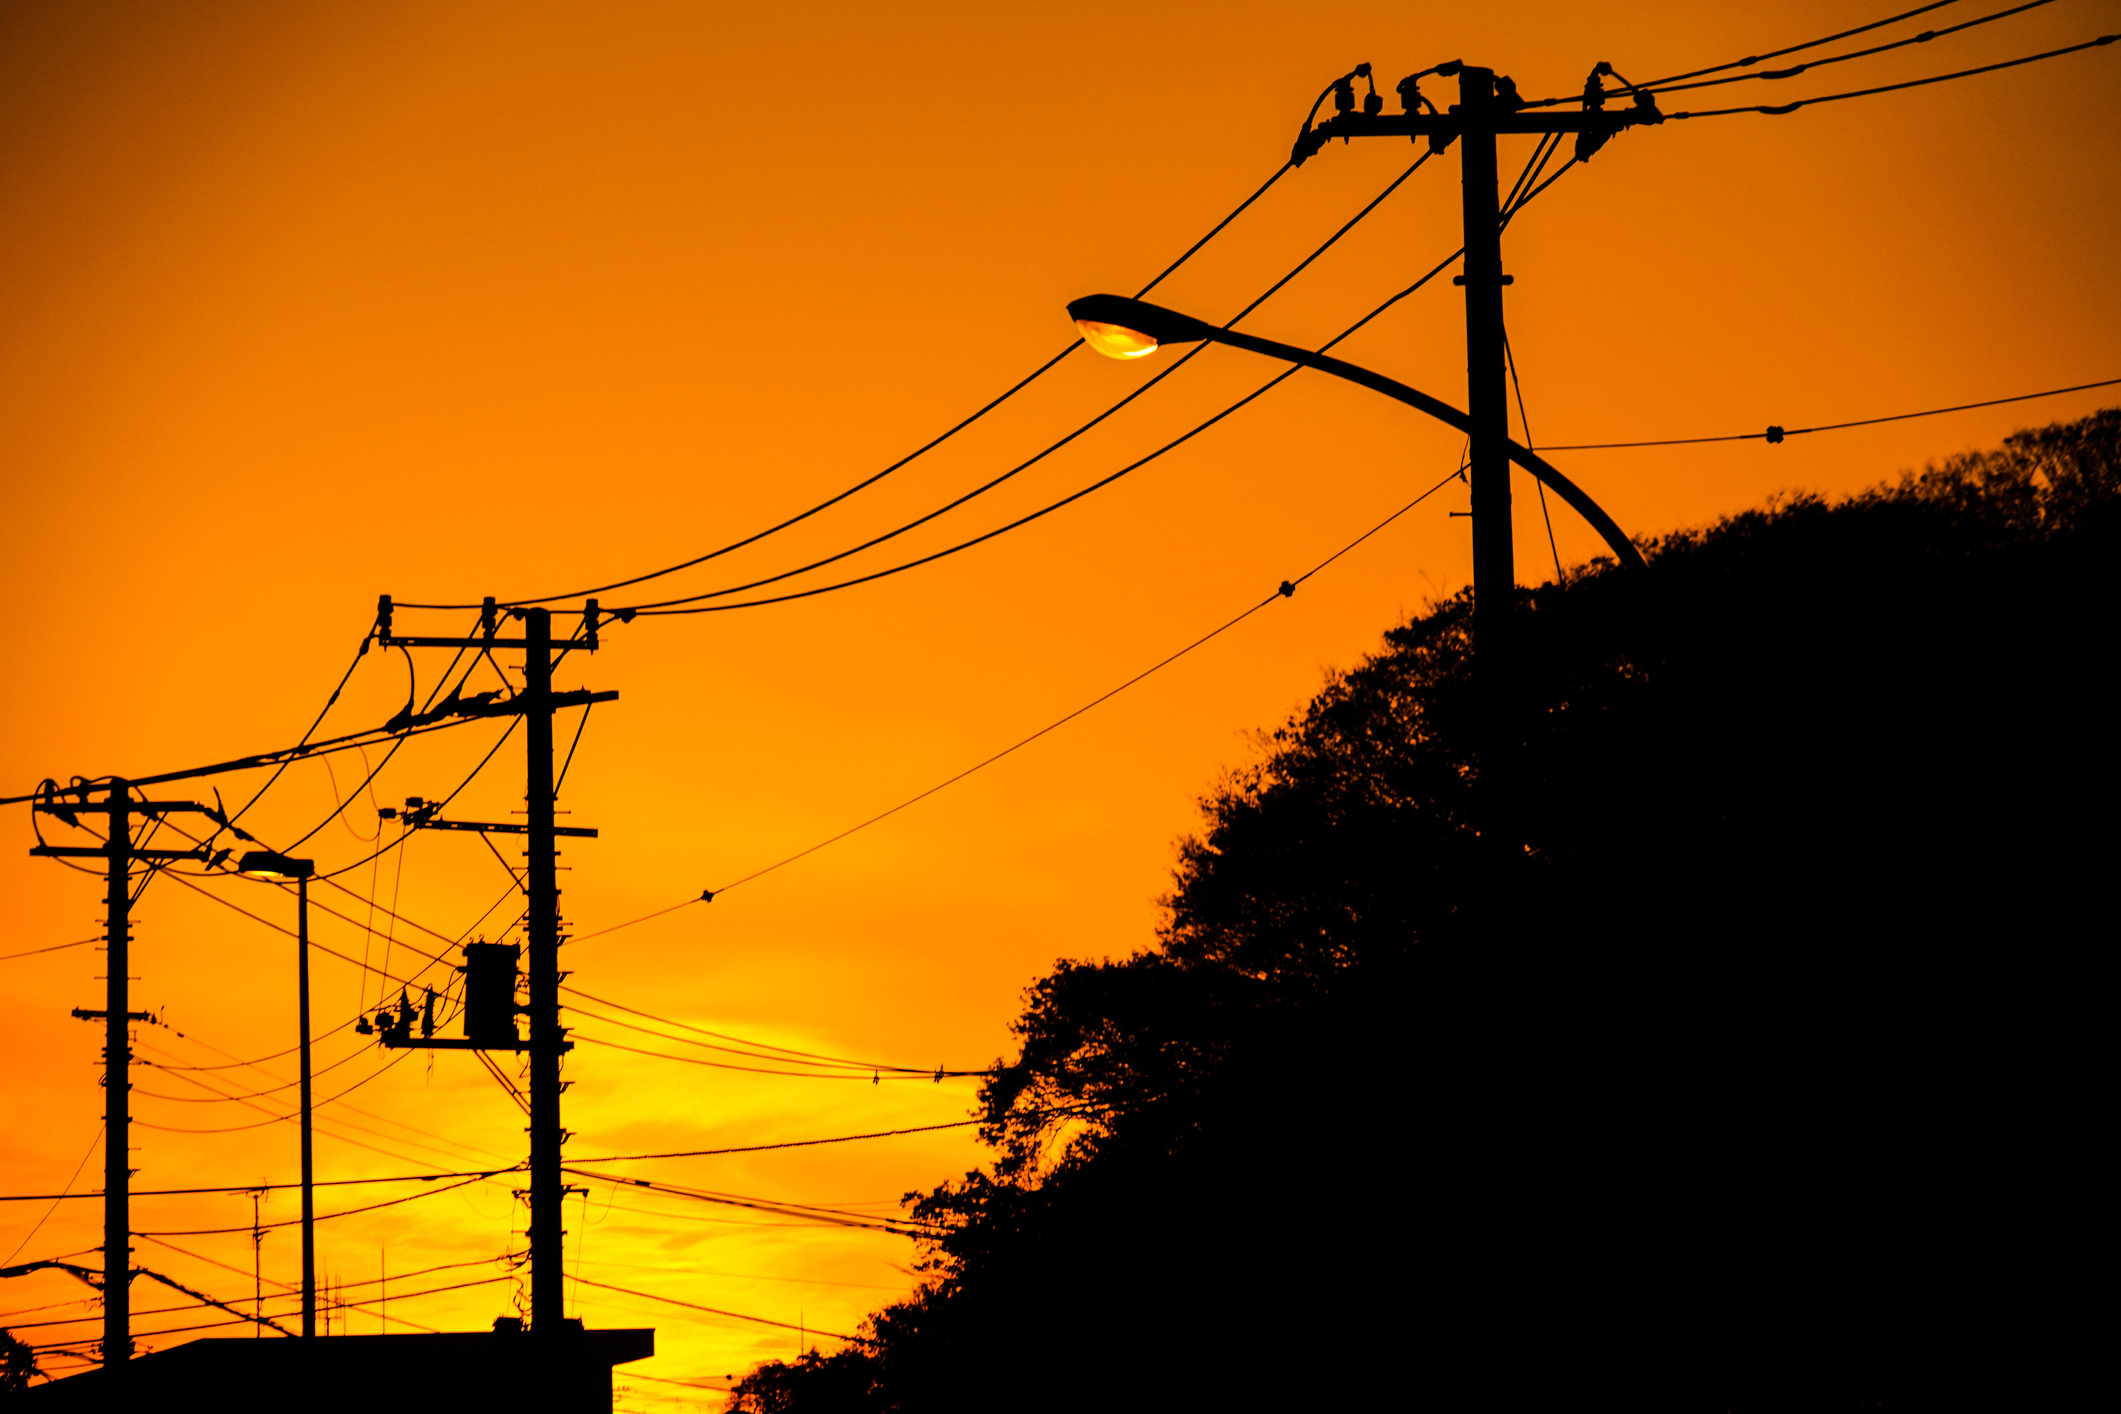 telephone lines in the sunset